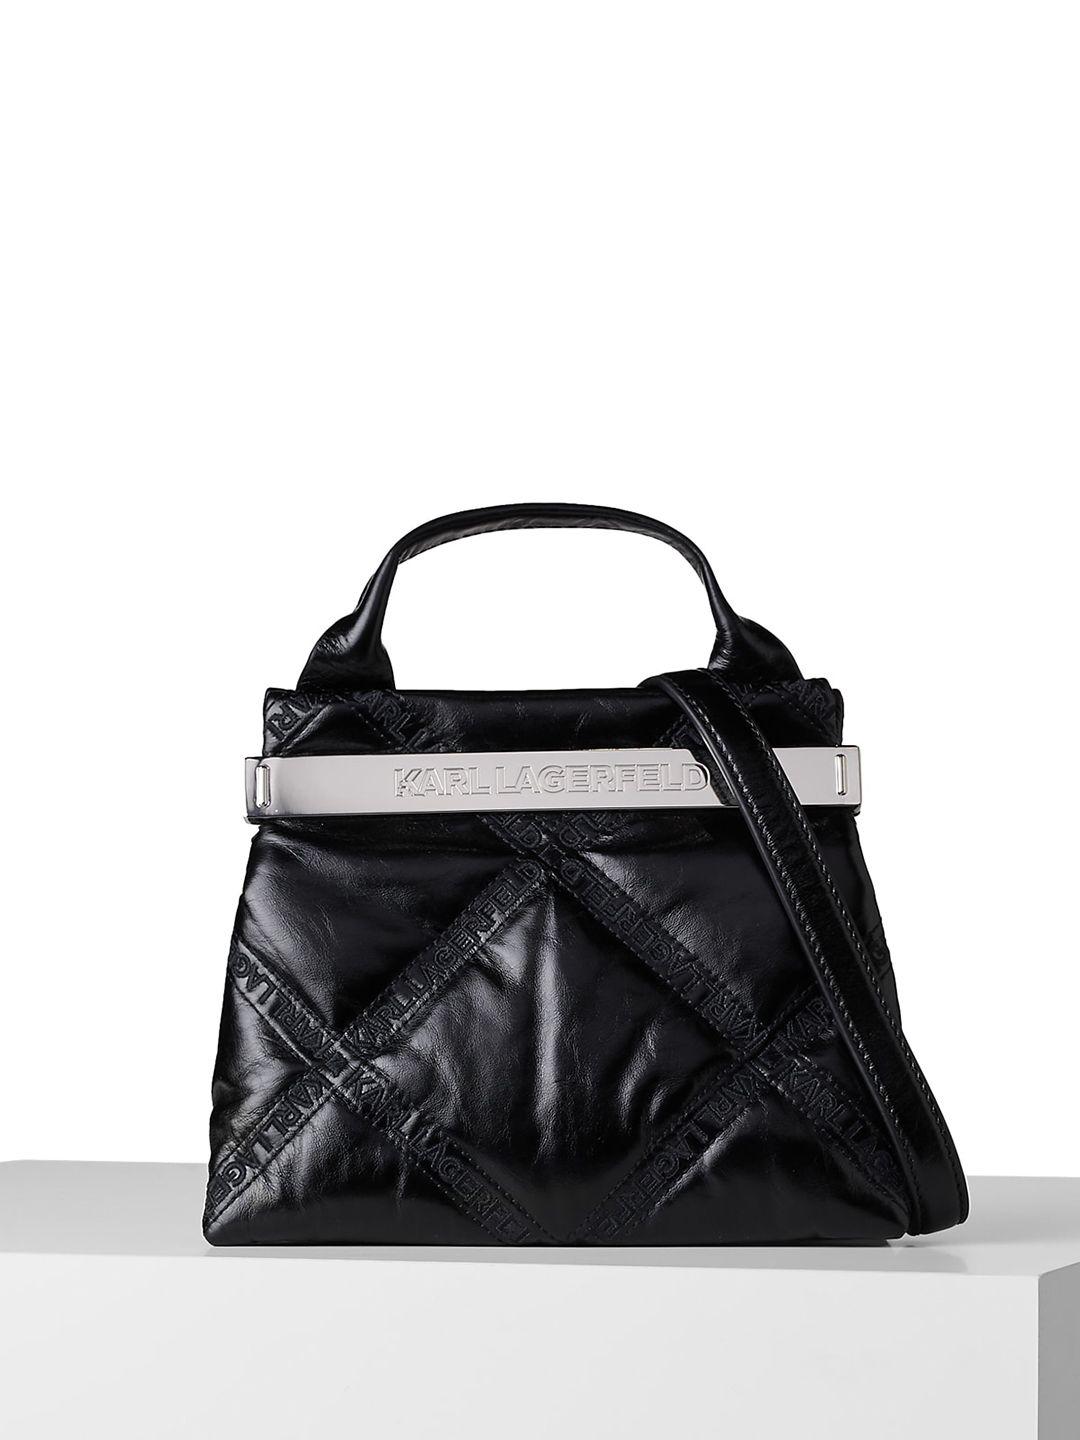 karl lagerfeld textured structured leather handheld bag with quilted